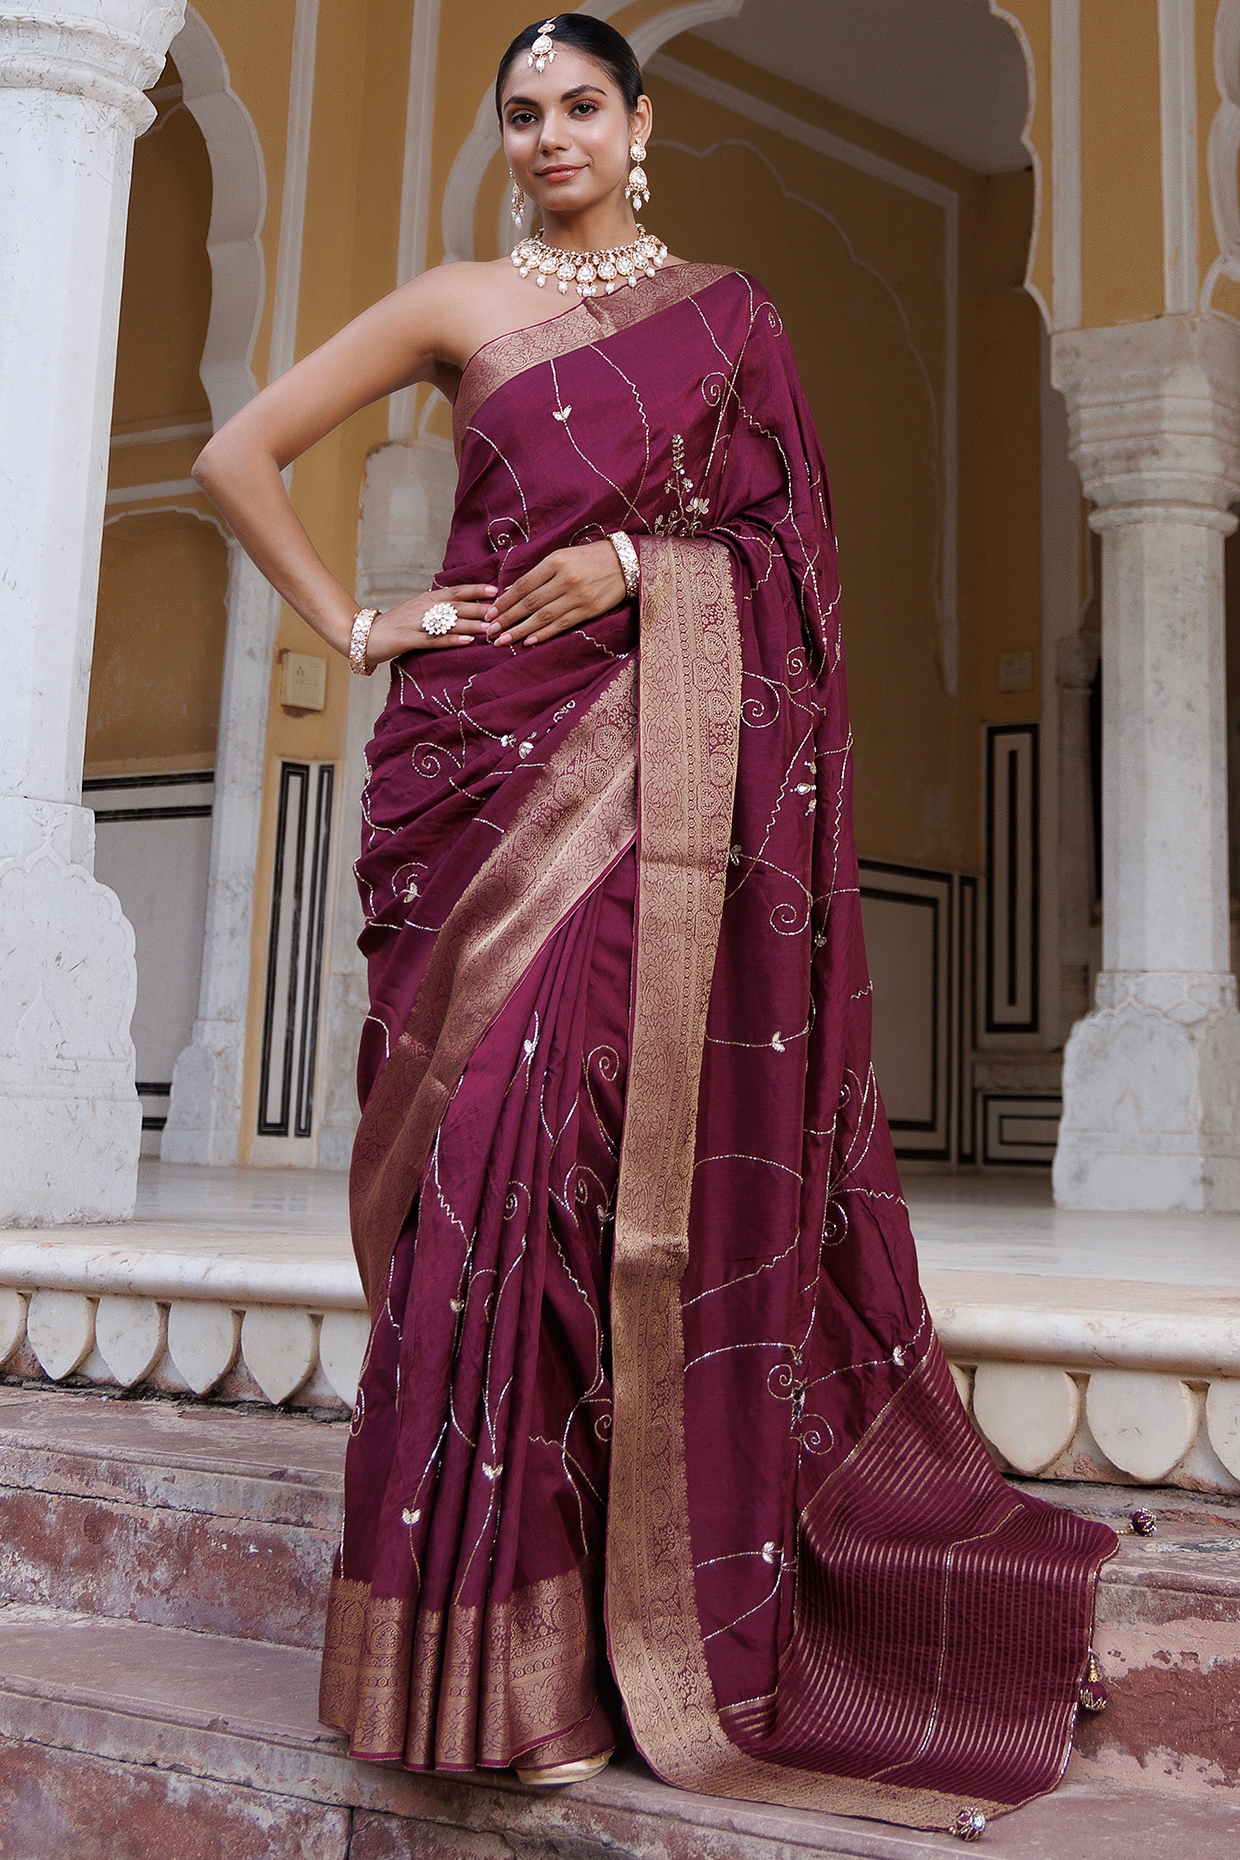 Shop the Hottest Maroon Saree with Golden Border Online Now